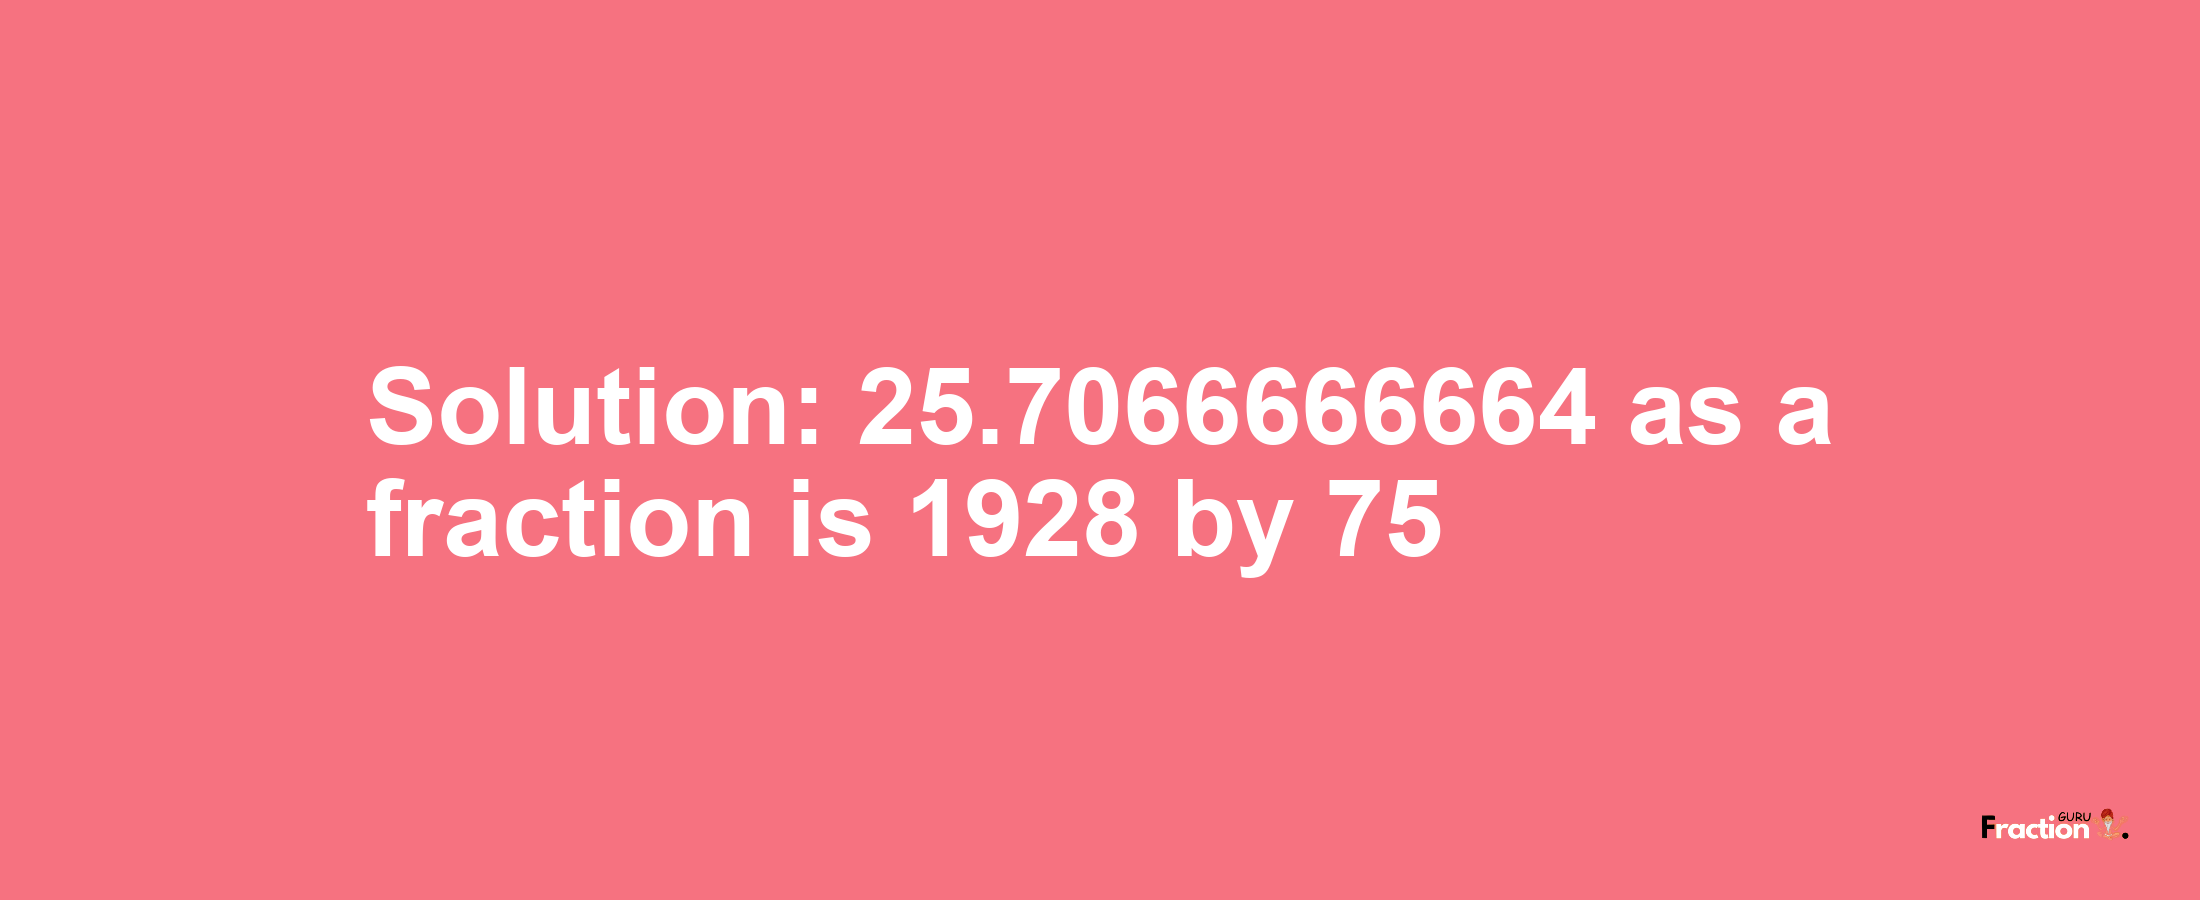 Solution:25.7066666664 as a fraction is 1928/75